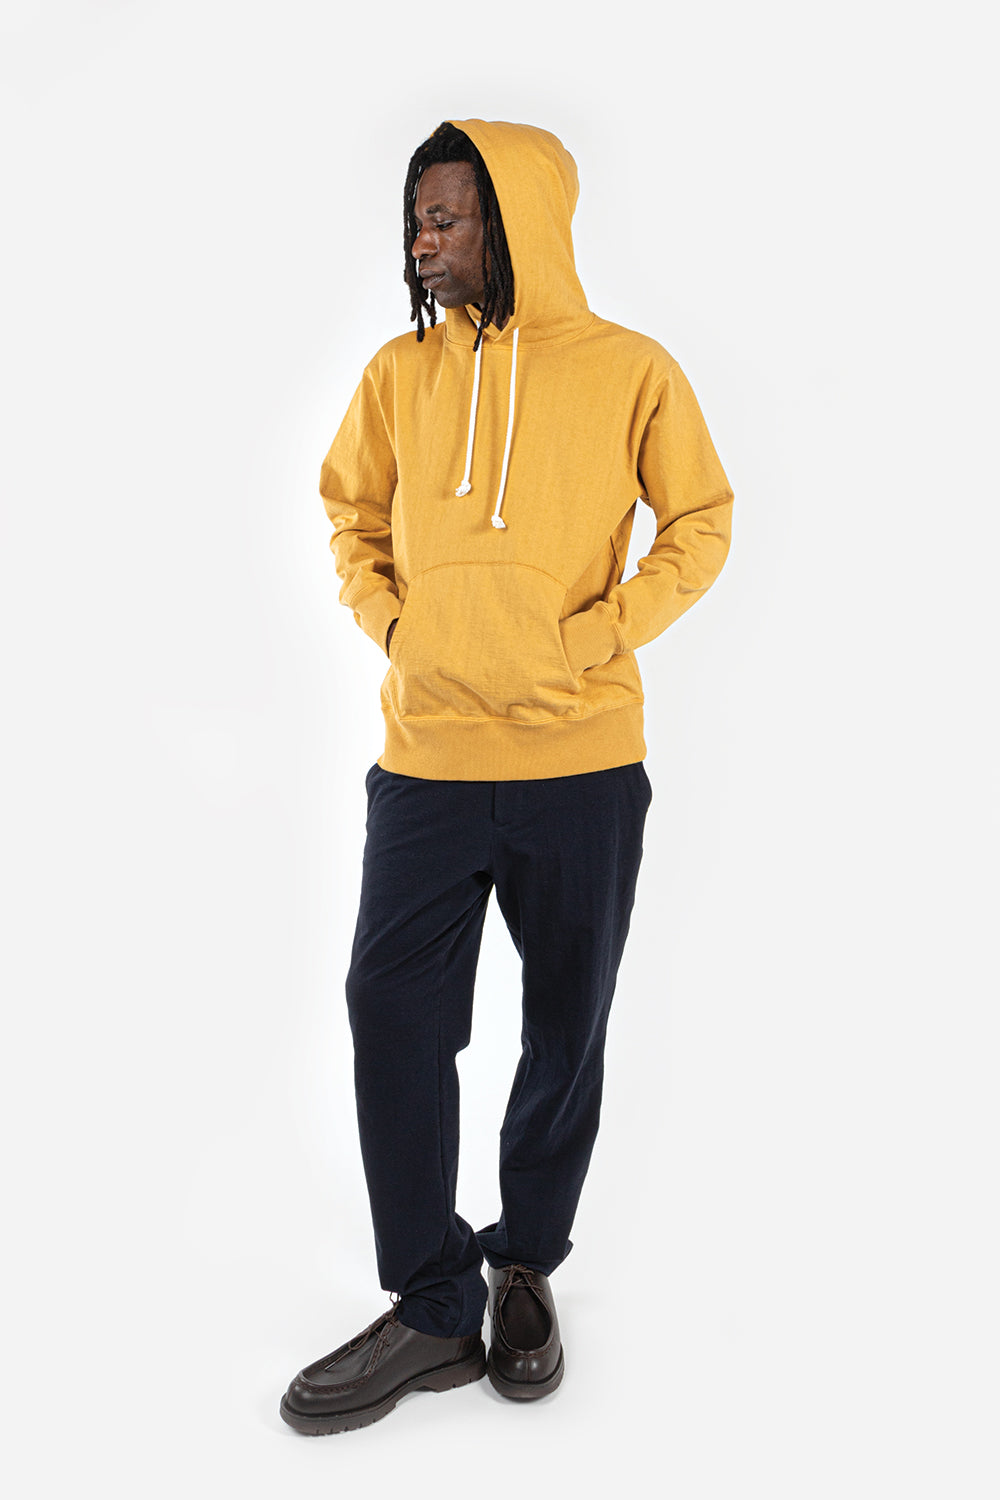 jackman-dotsume-pullover-parka-knuckle-yellow